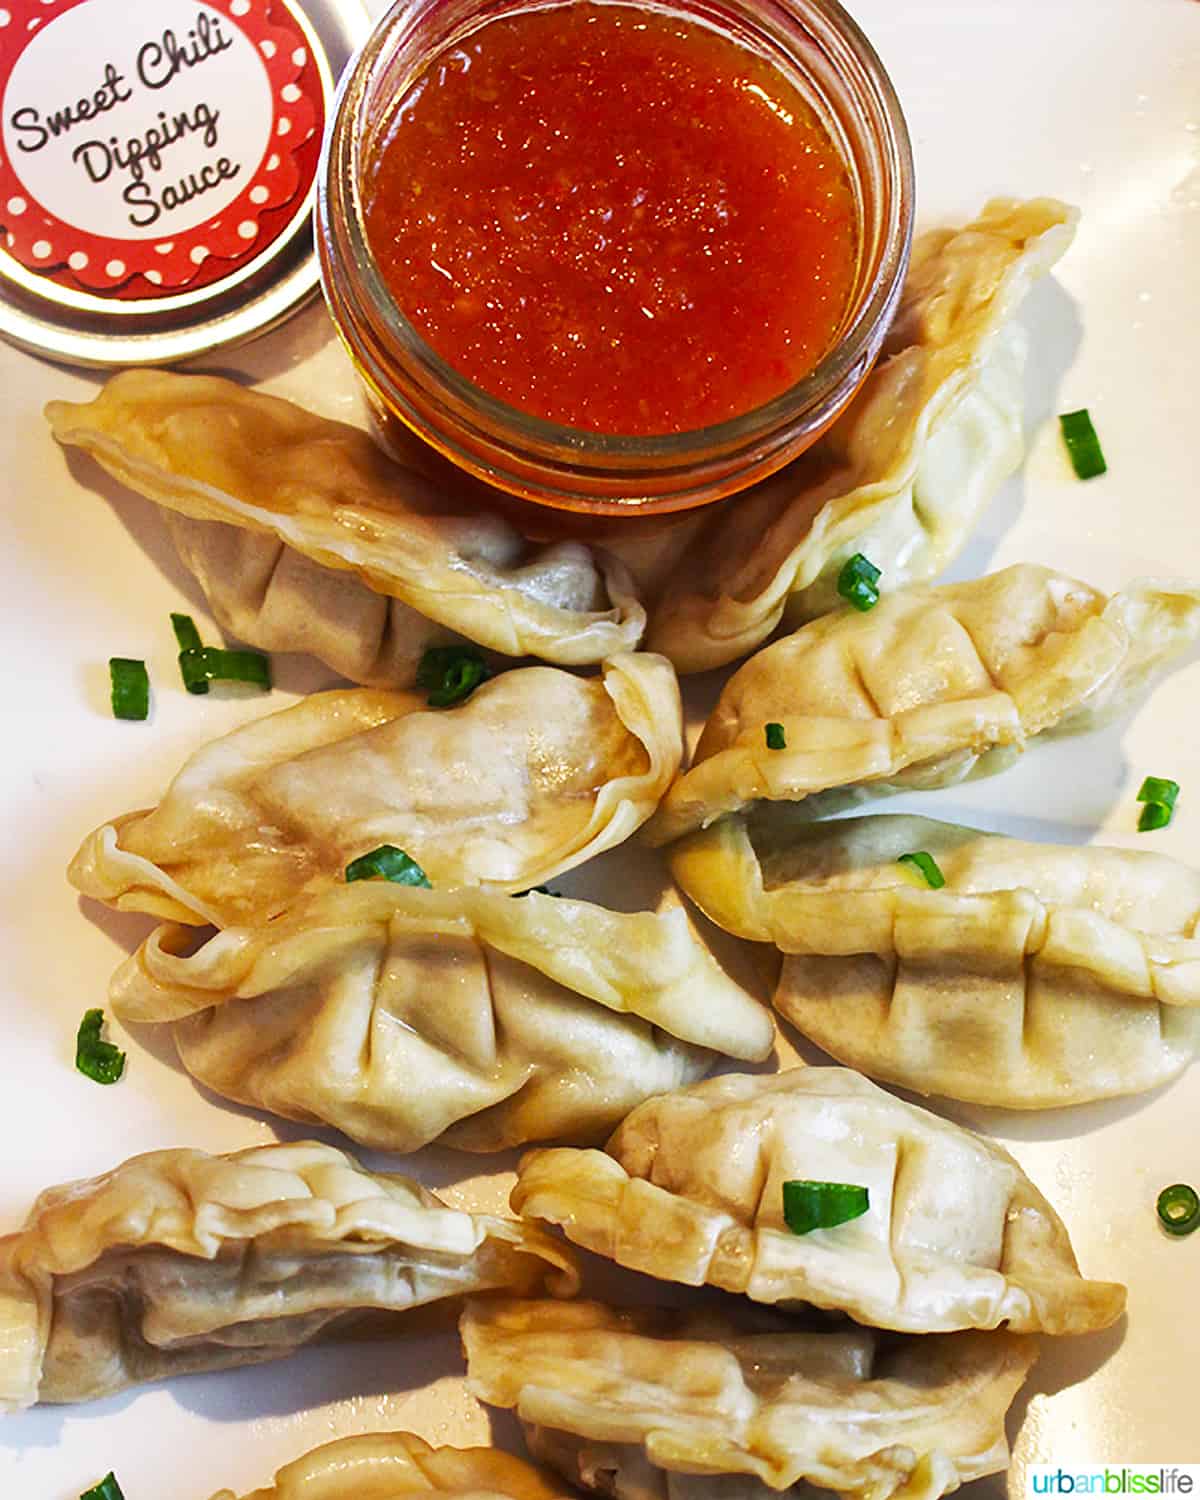 jar of sweet chili dipping sauce with dumplings on a white plate.